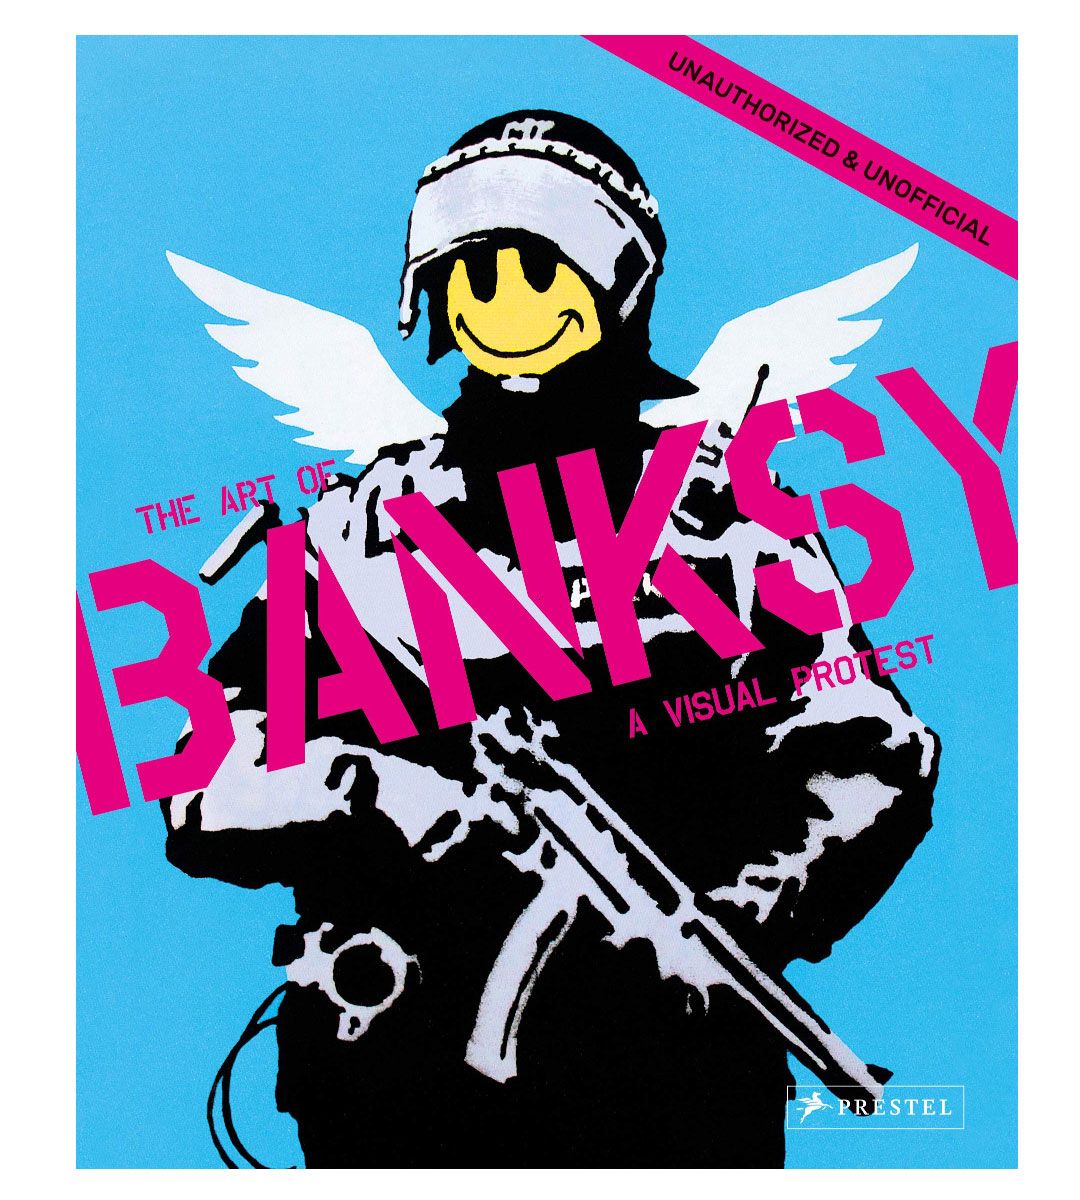 A visual protest : the art of Banksy